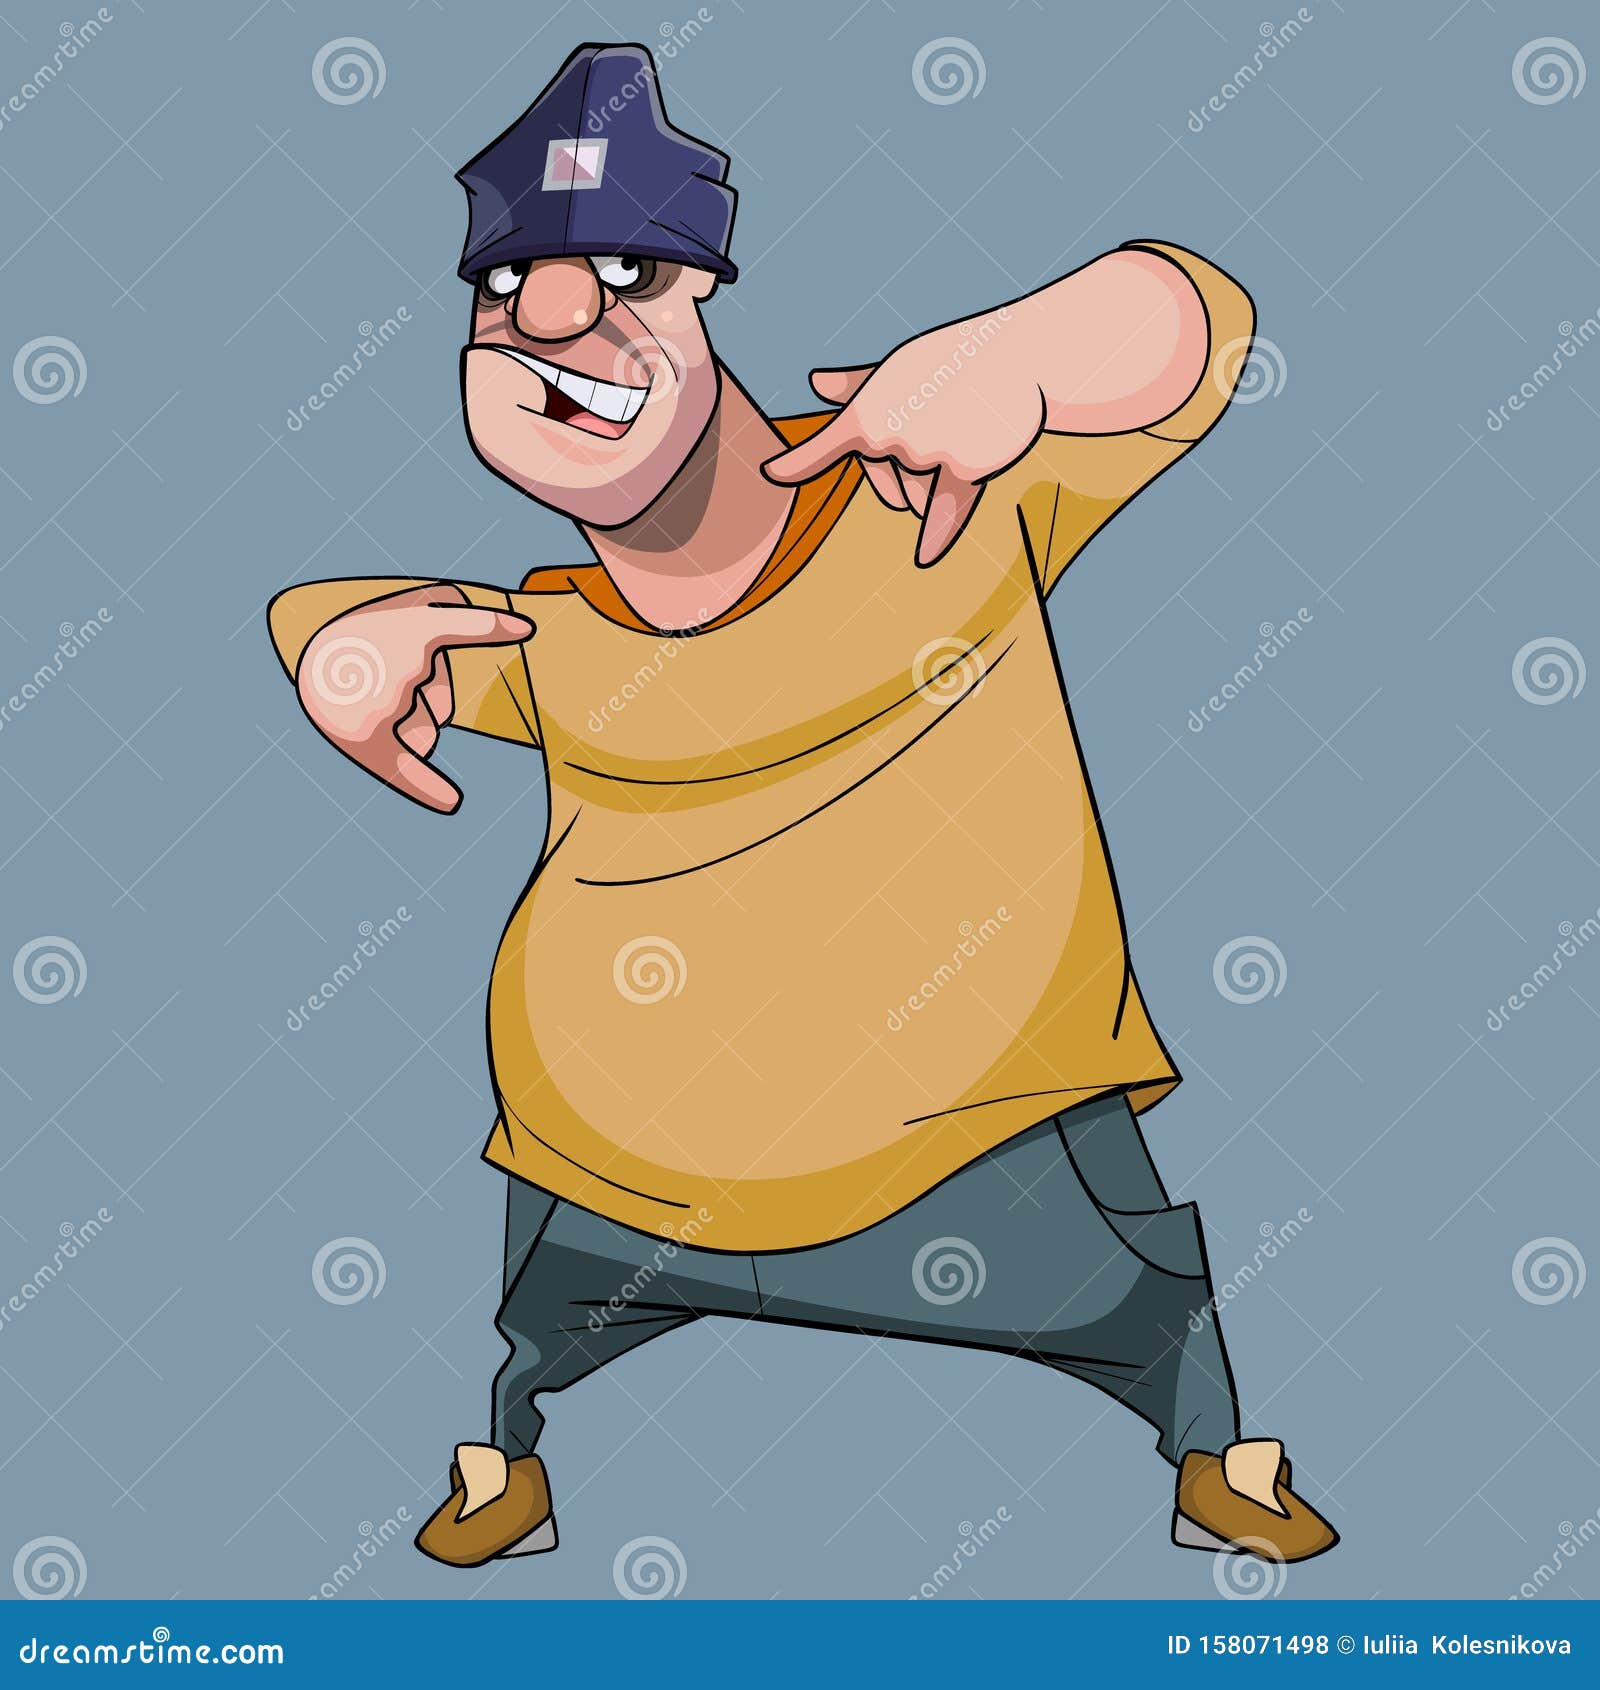 Cartoon Big Guy Funny Portrays Tough Dude Stock Vector - Illustration of  arms, determined: 158071498